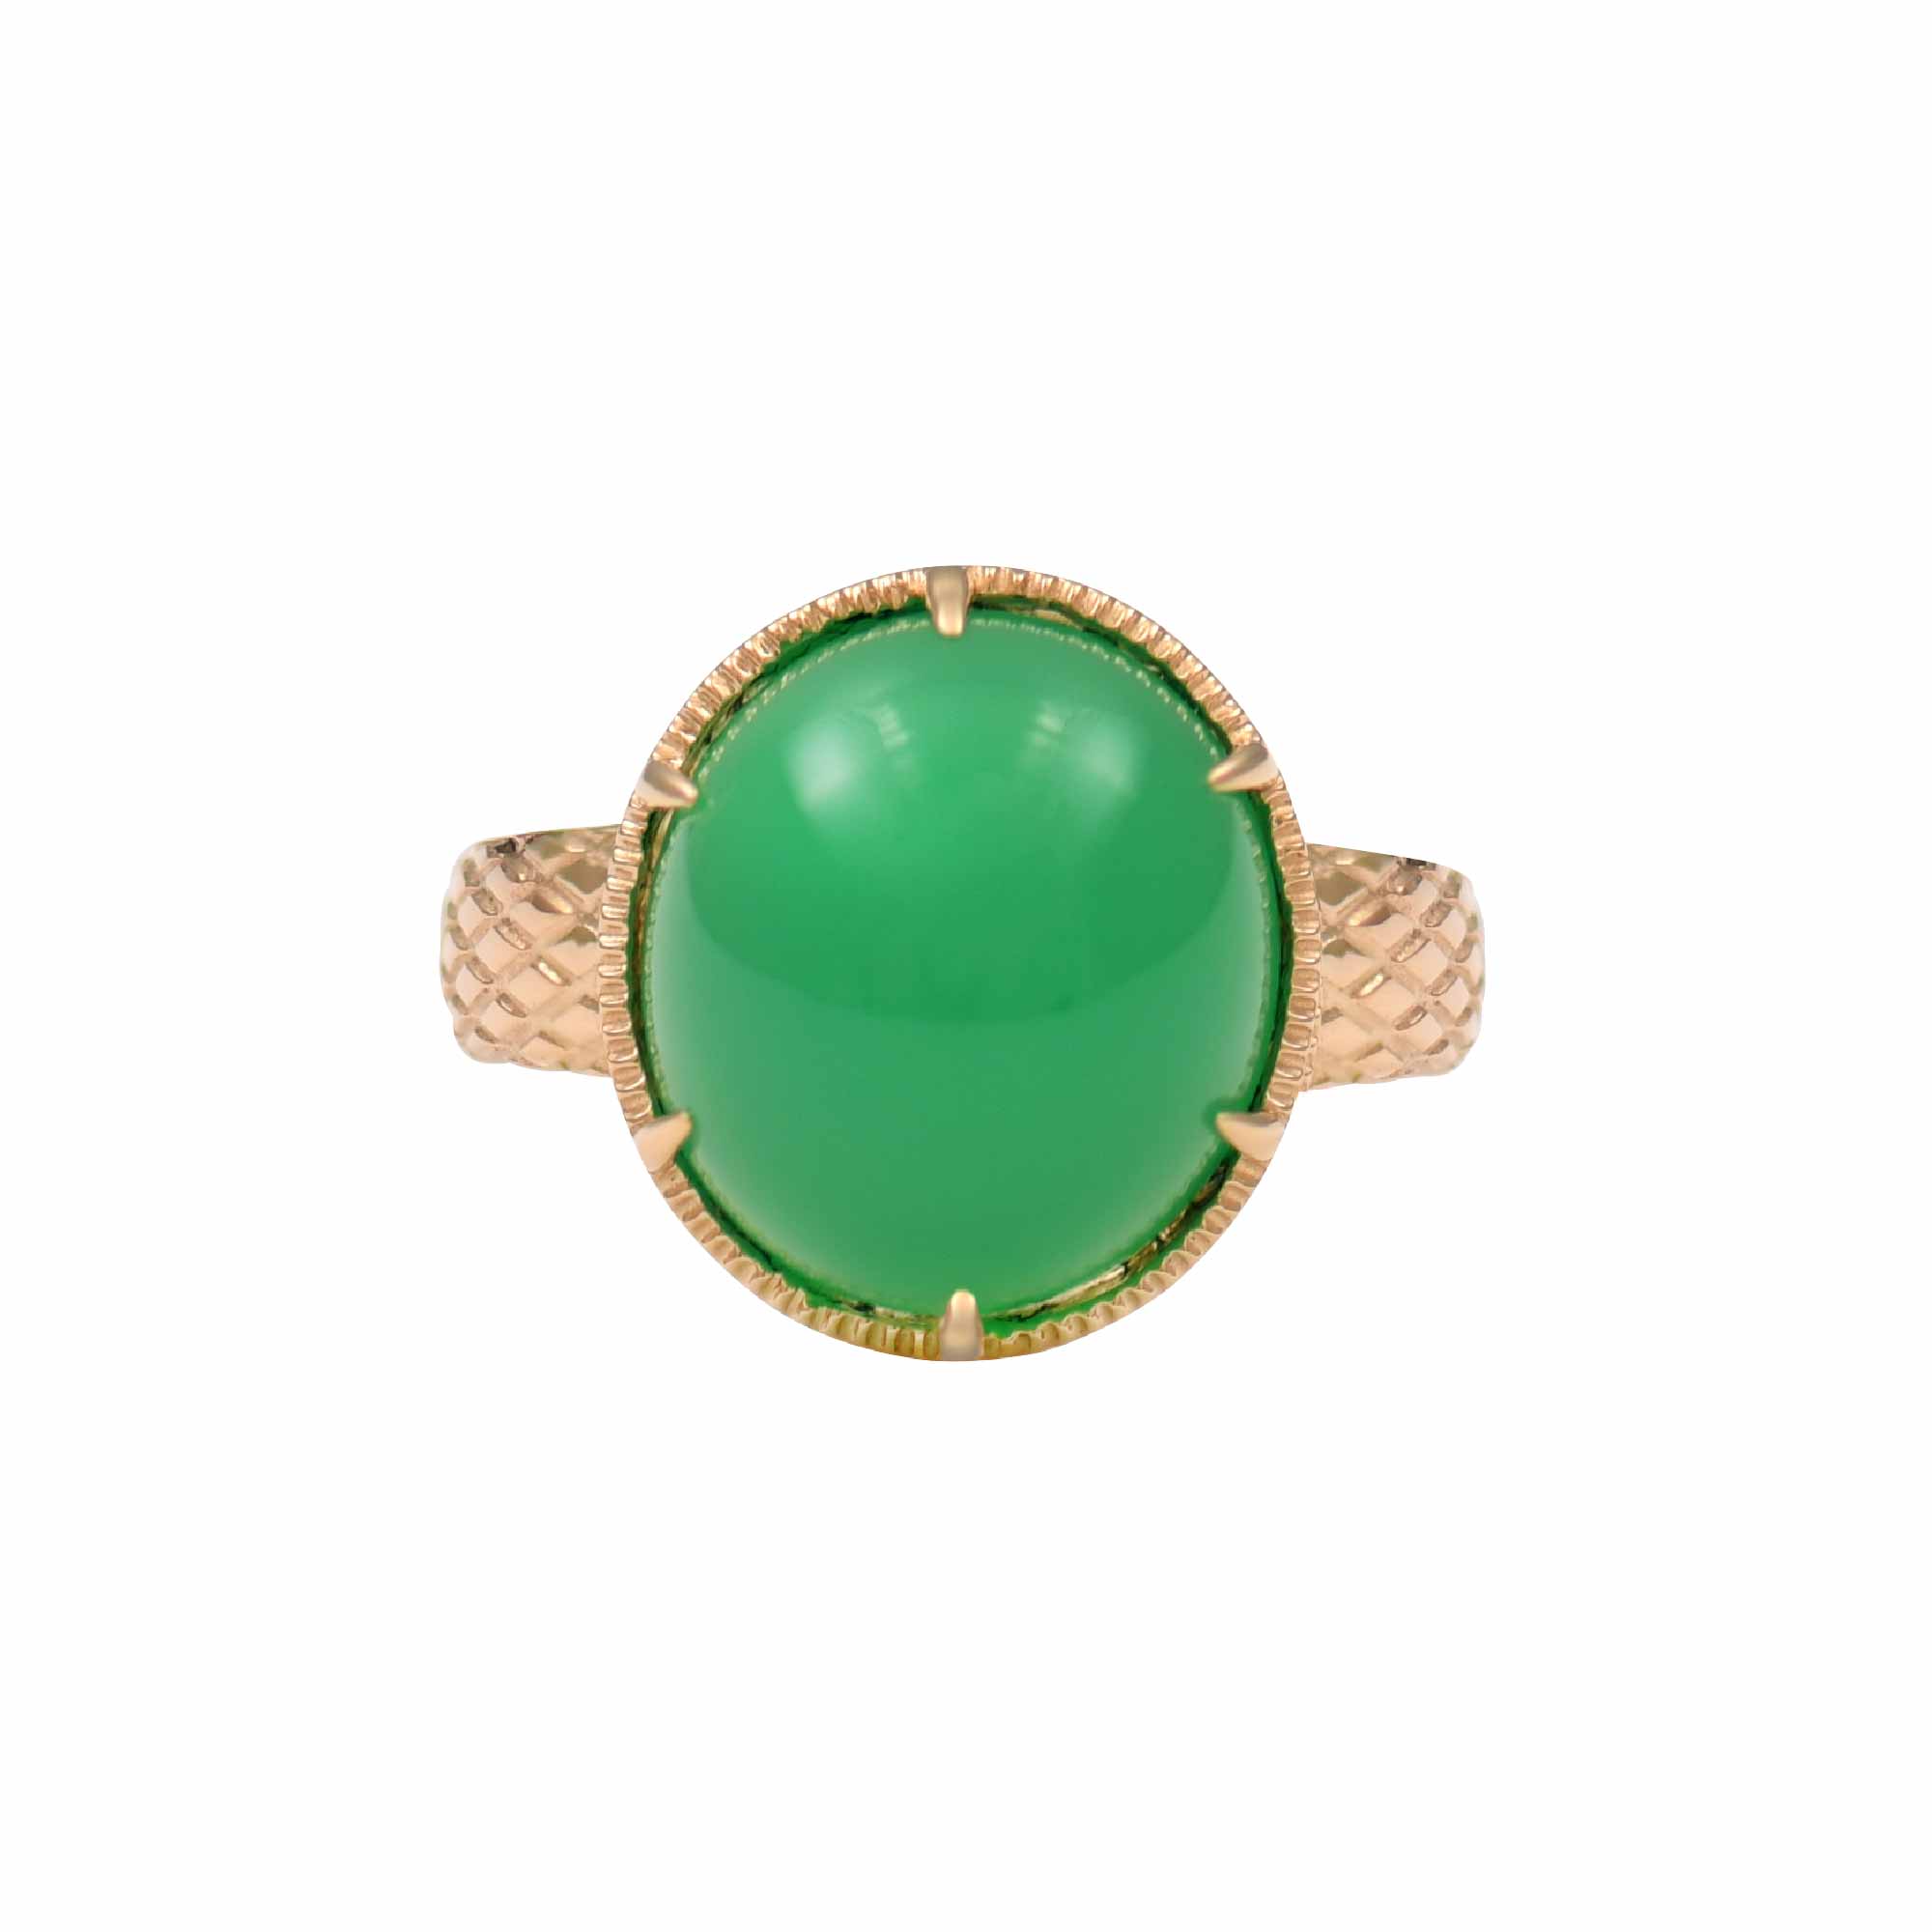 Green Chalcedony Gold Ring with Vintage Tuck and Roll Design